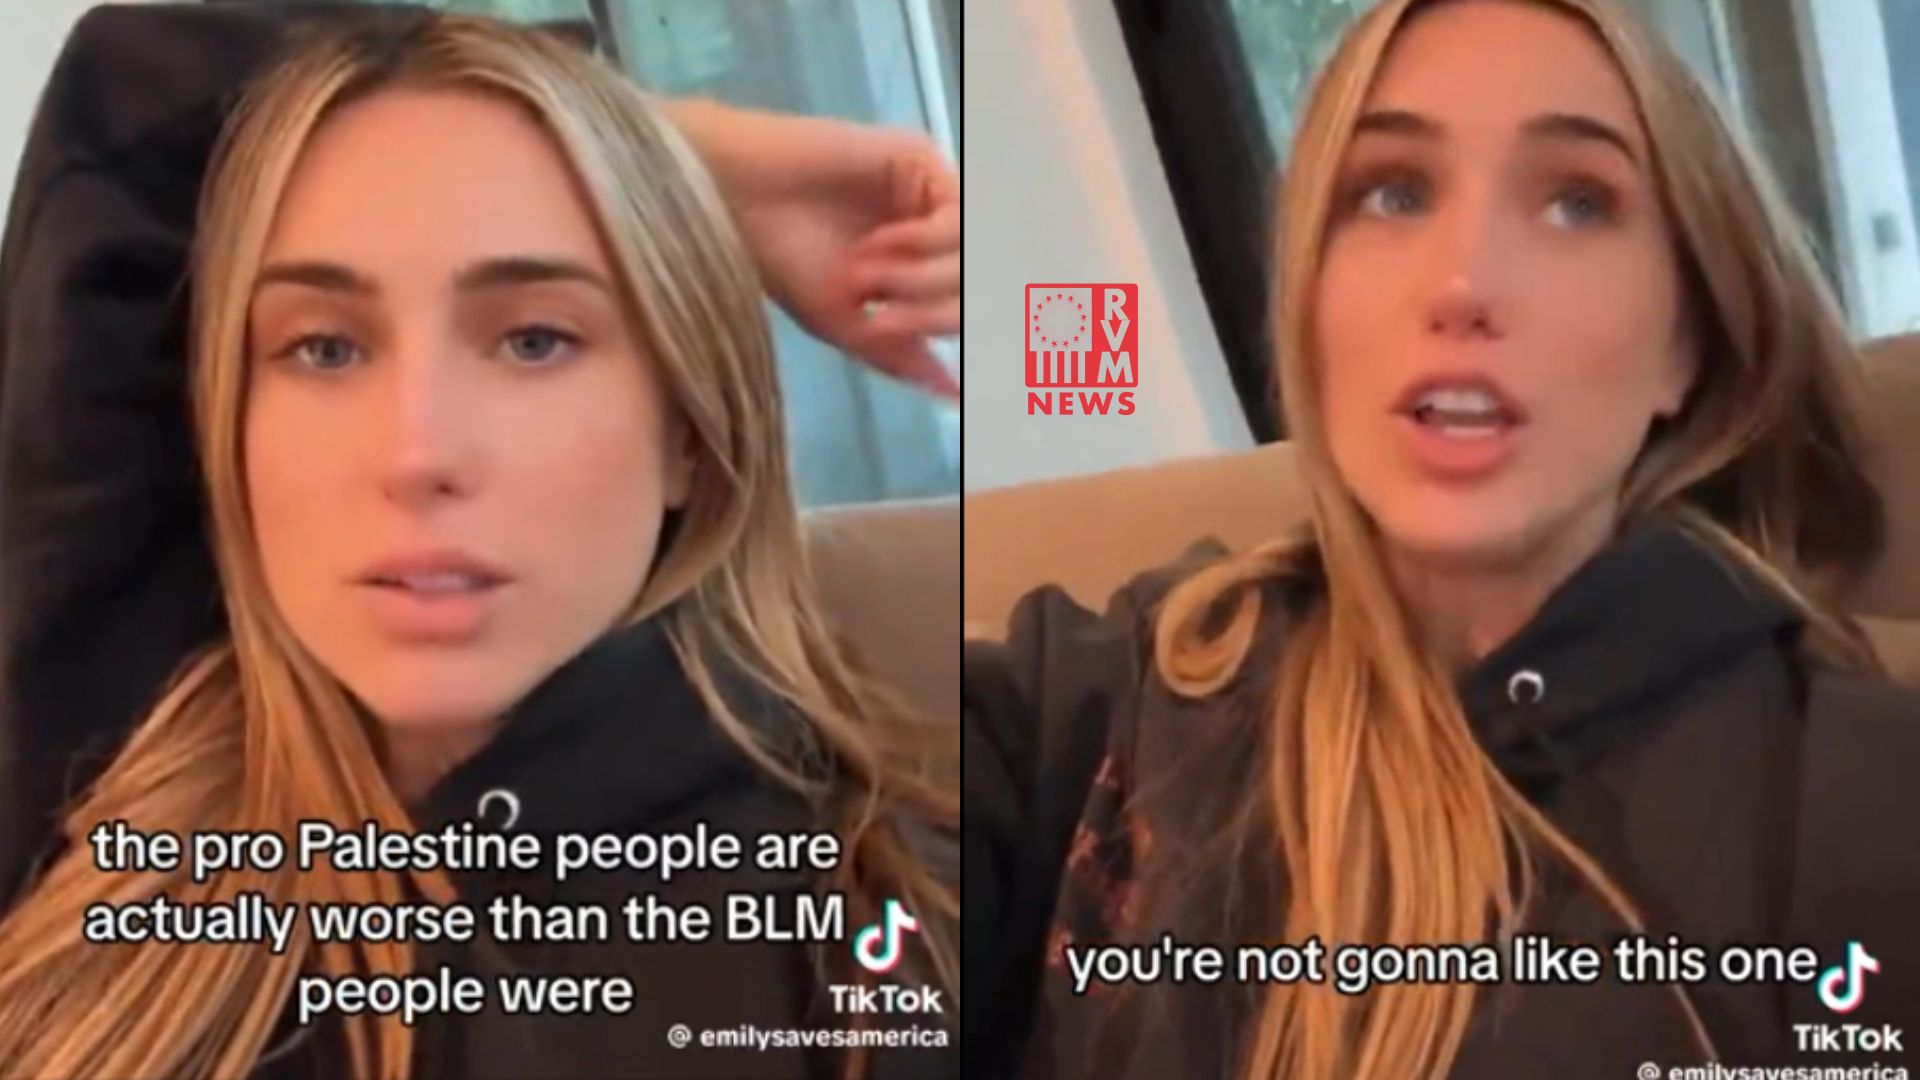 This Girl’s Rant Is Going Viral Because the Pro-Palestinian Crowd Is Super-Offended [VIDEO]